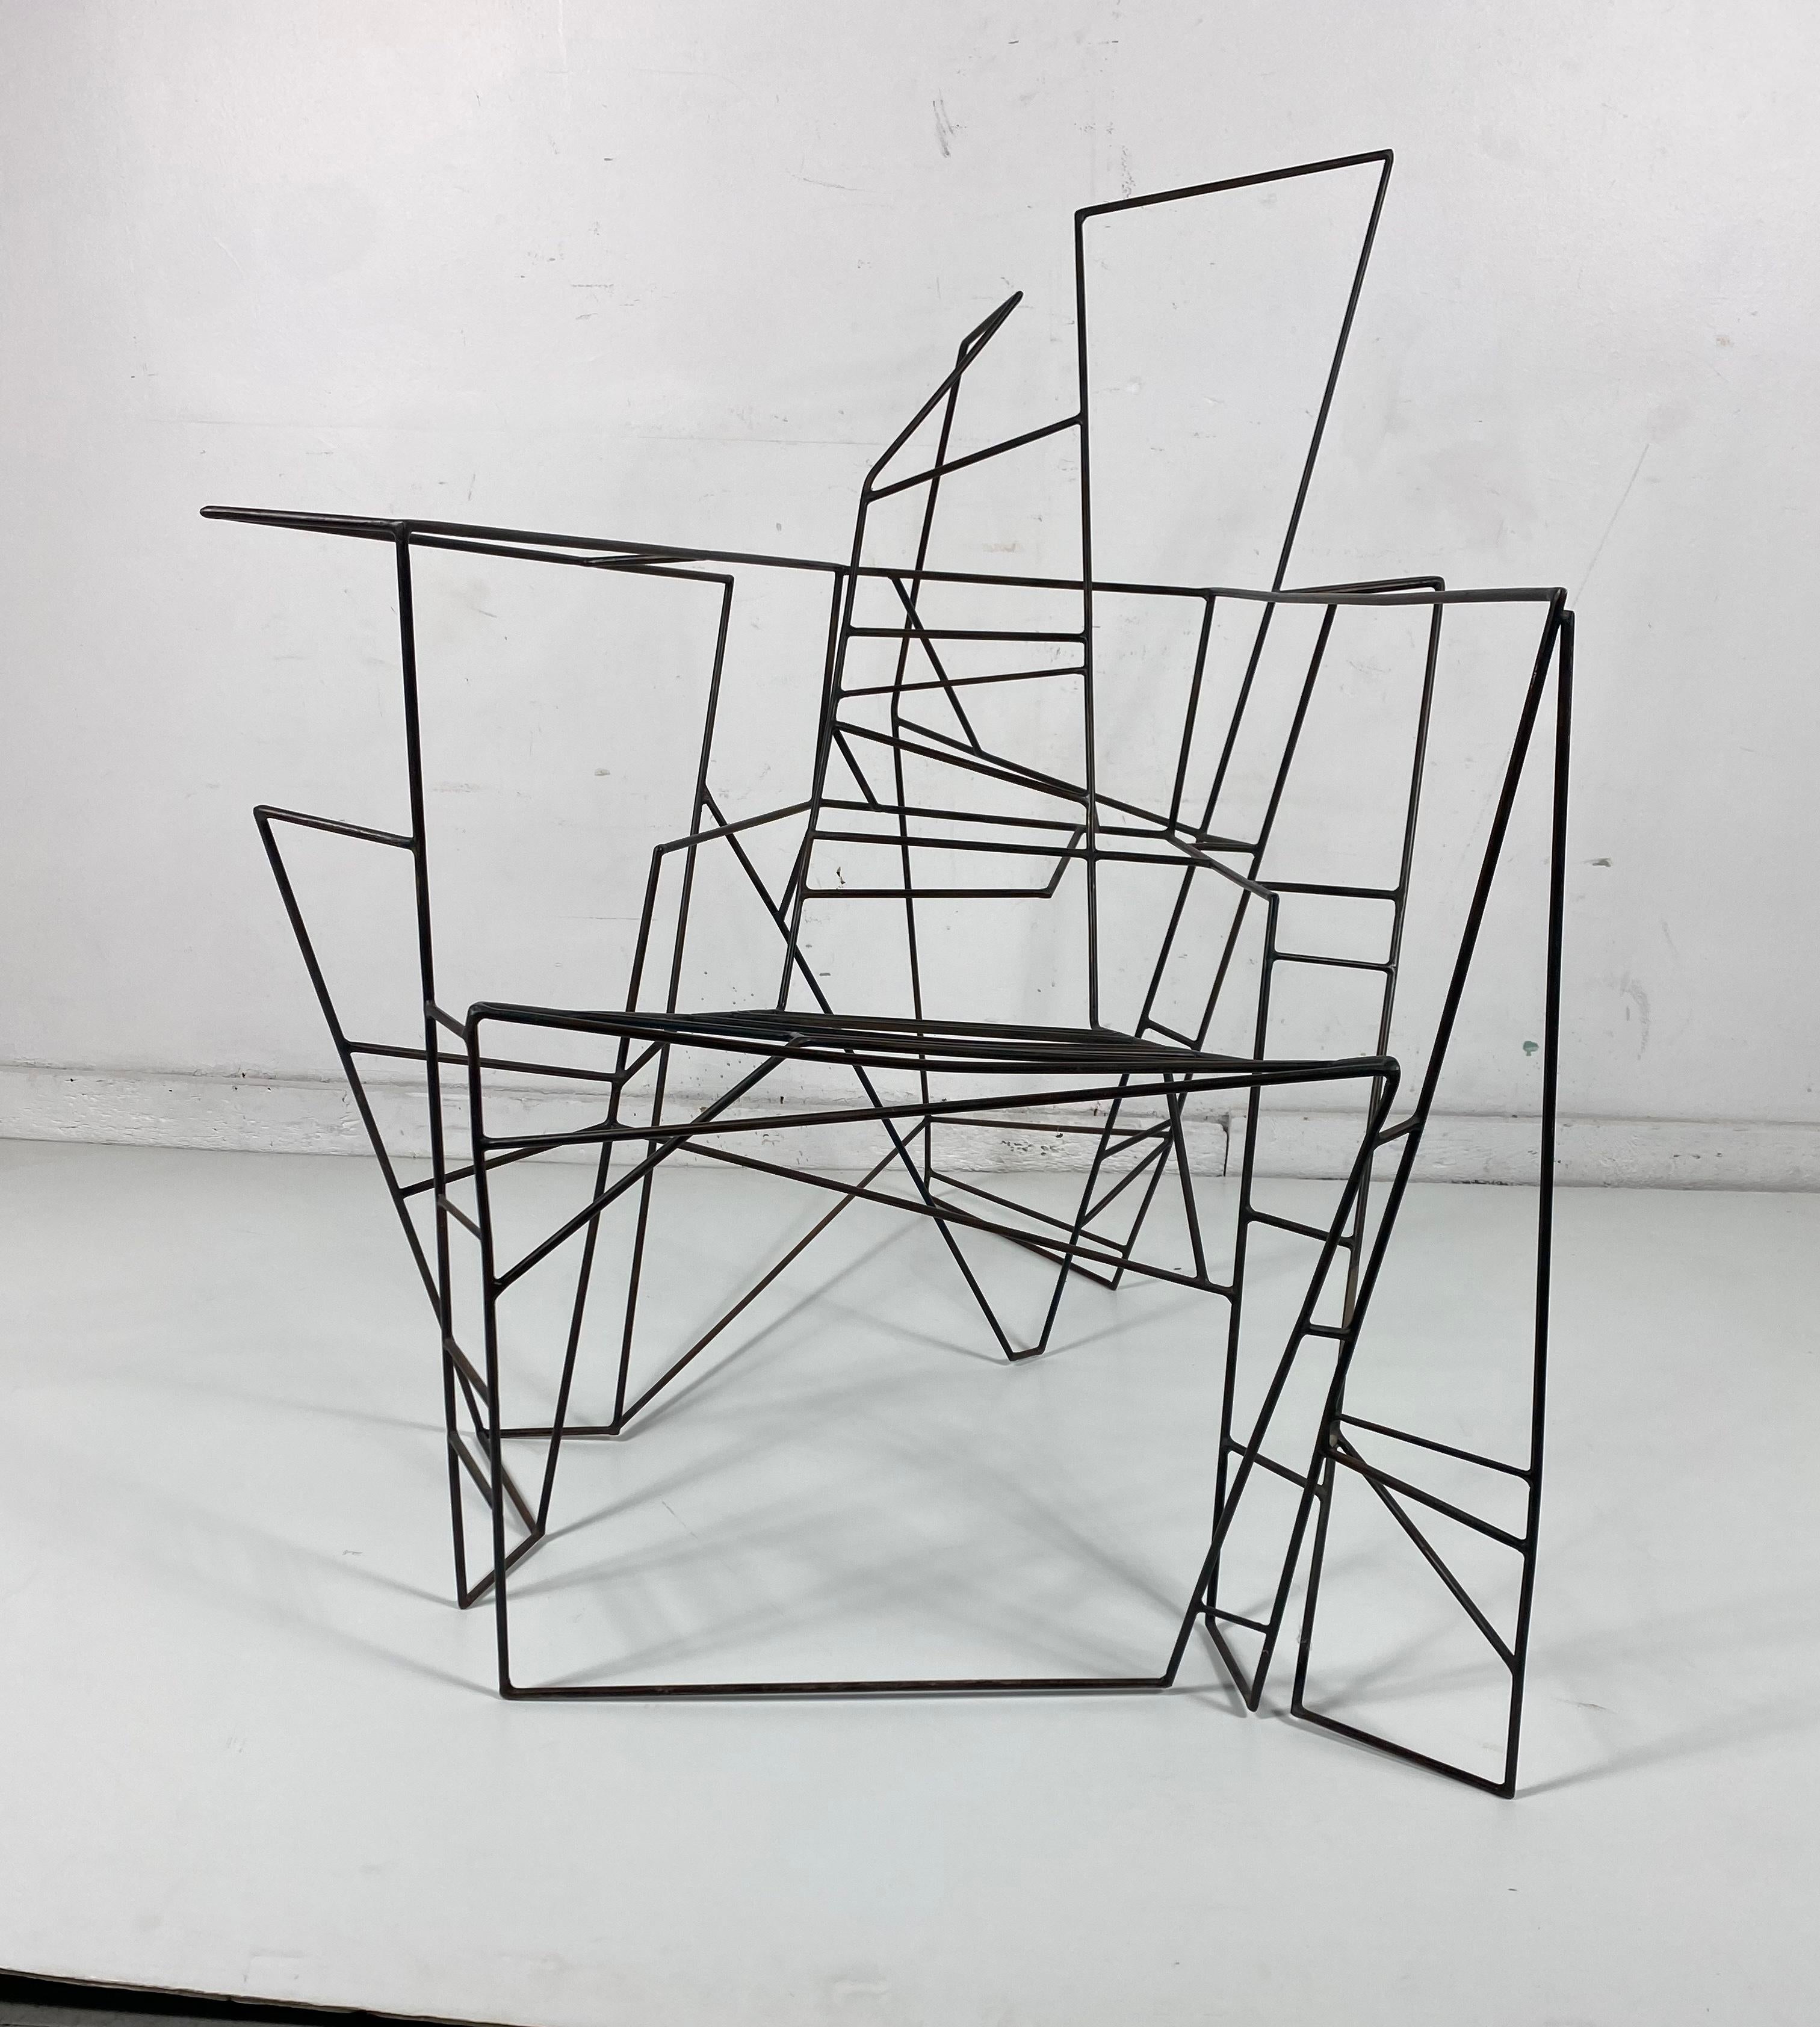 Unusual artist built wire-iron chair / sculpture, Constructivism, manner of Alexander Calder, recently purchased out of high end estate in Rochester NY, Home filled with amazing art, sculpture and antiques. Unfortunately have not been able to